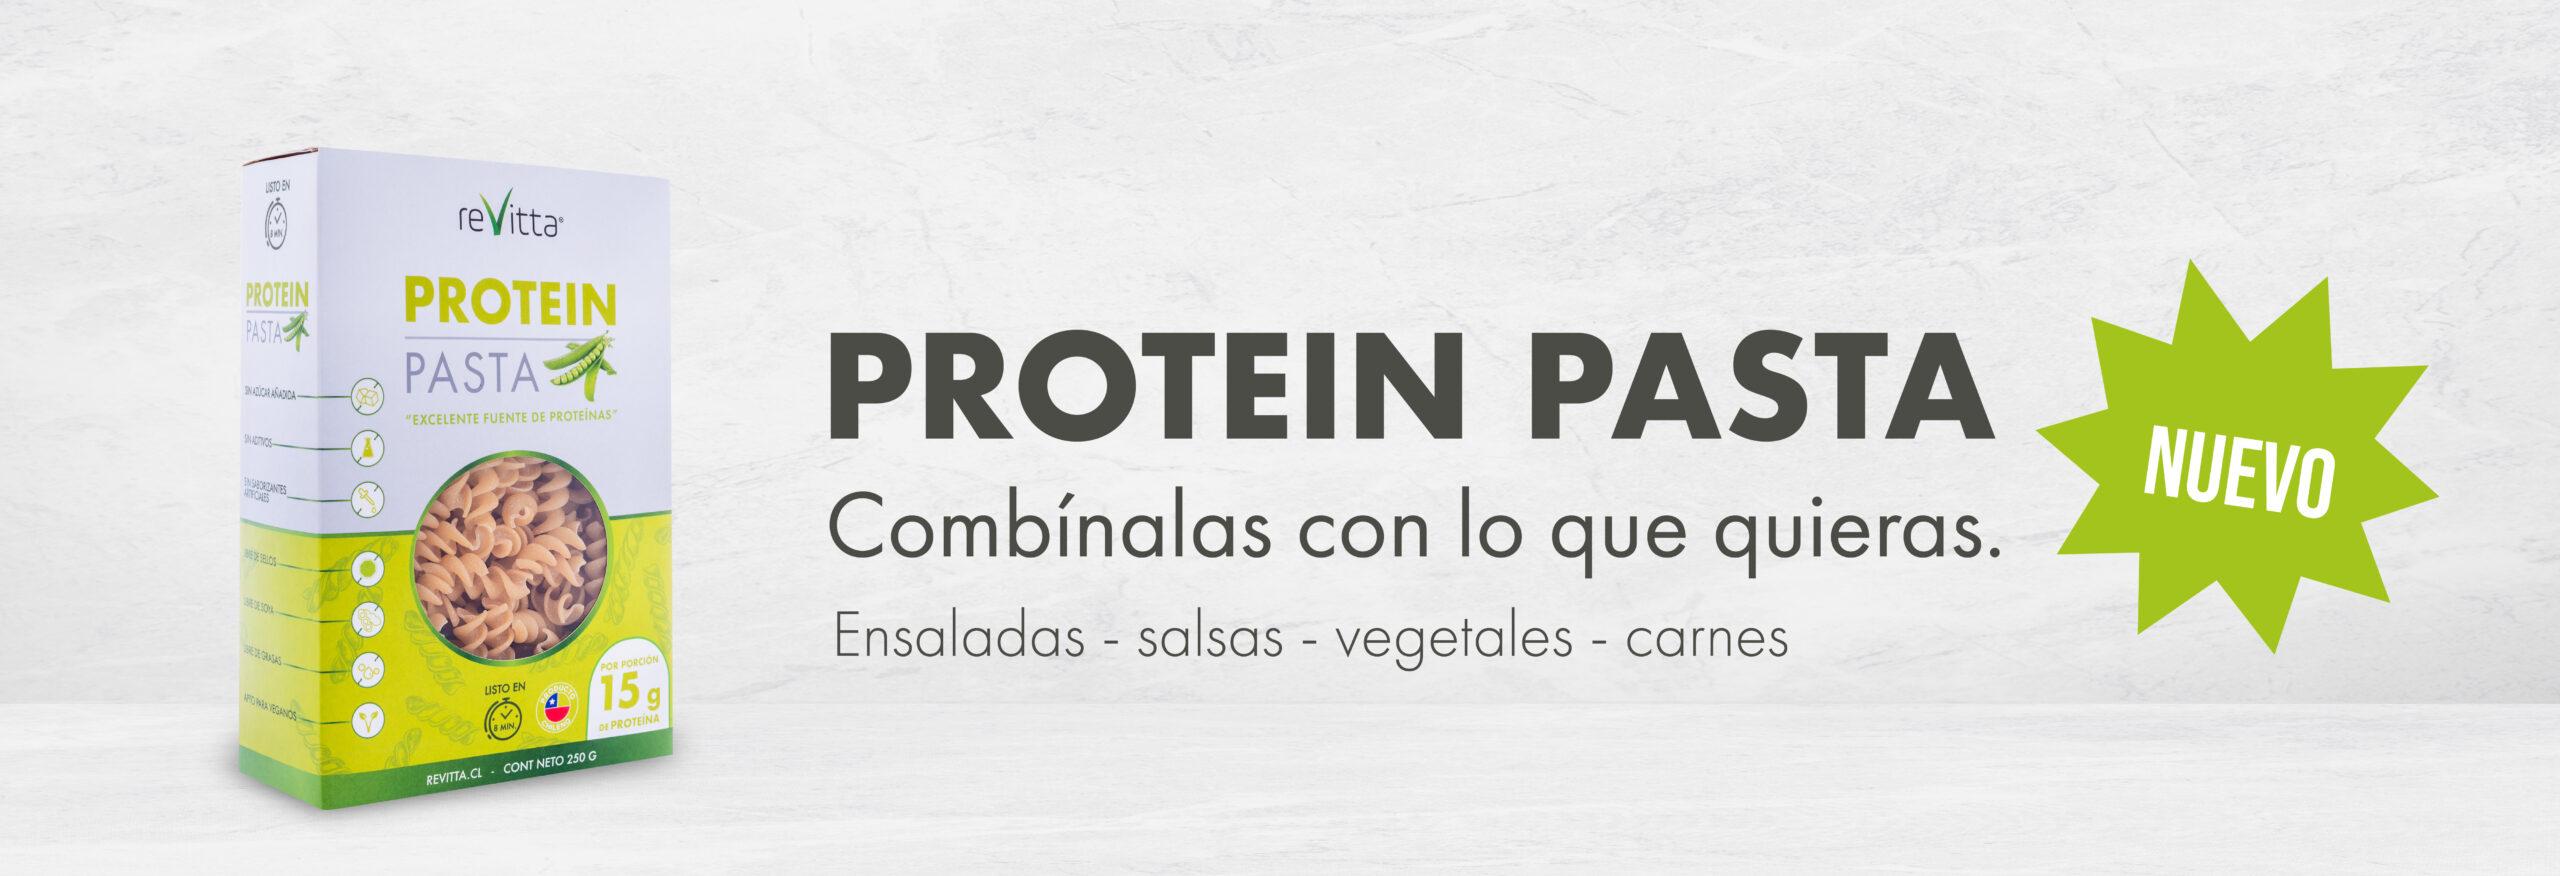 https://revitta.cl/productos/protein-pasta-250-grs/